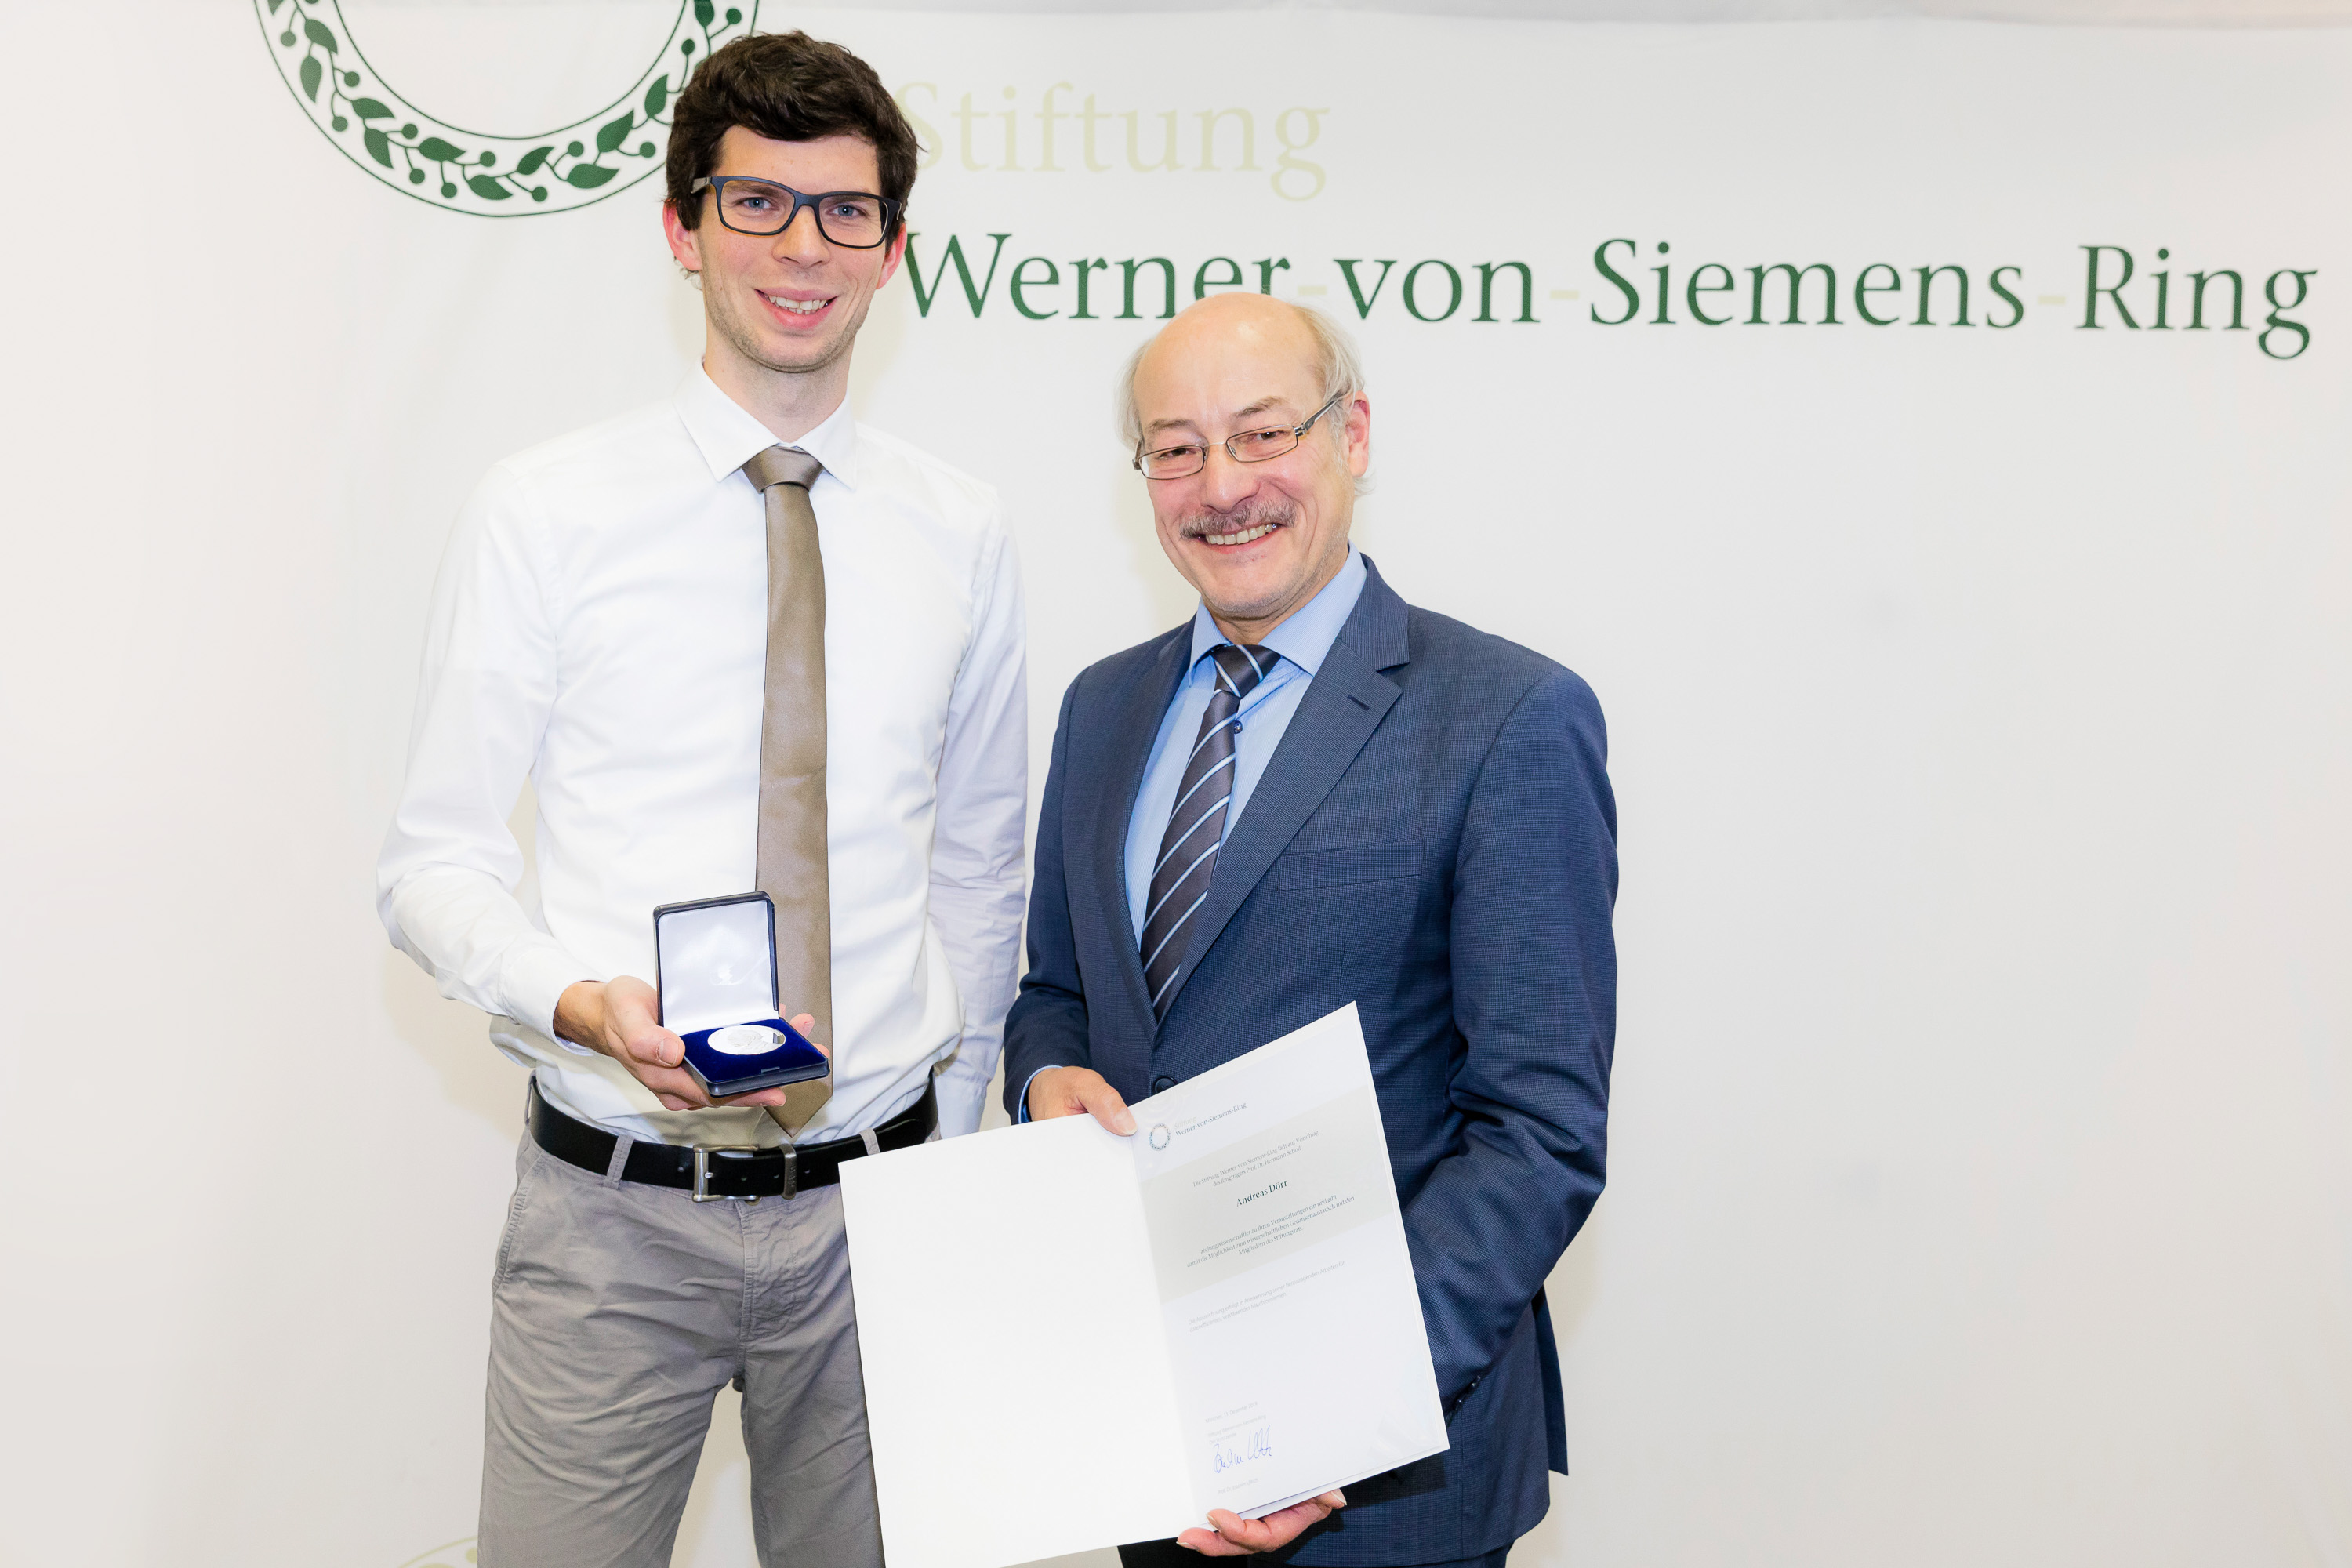 Werner-von-Siemens-Ring foundation honours doctoral student Andreas Dörr |  Max Planck Institute for Intelligent Systems